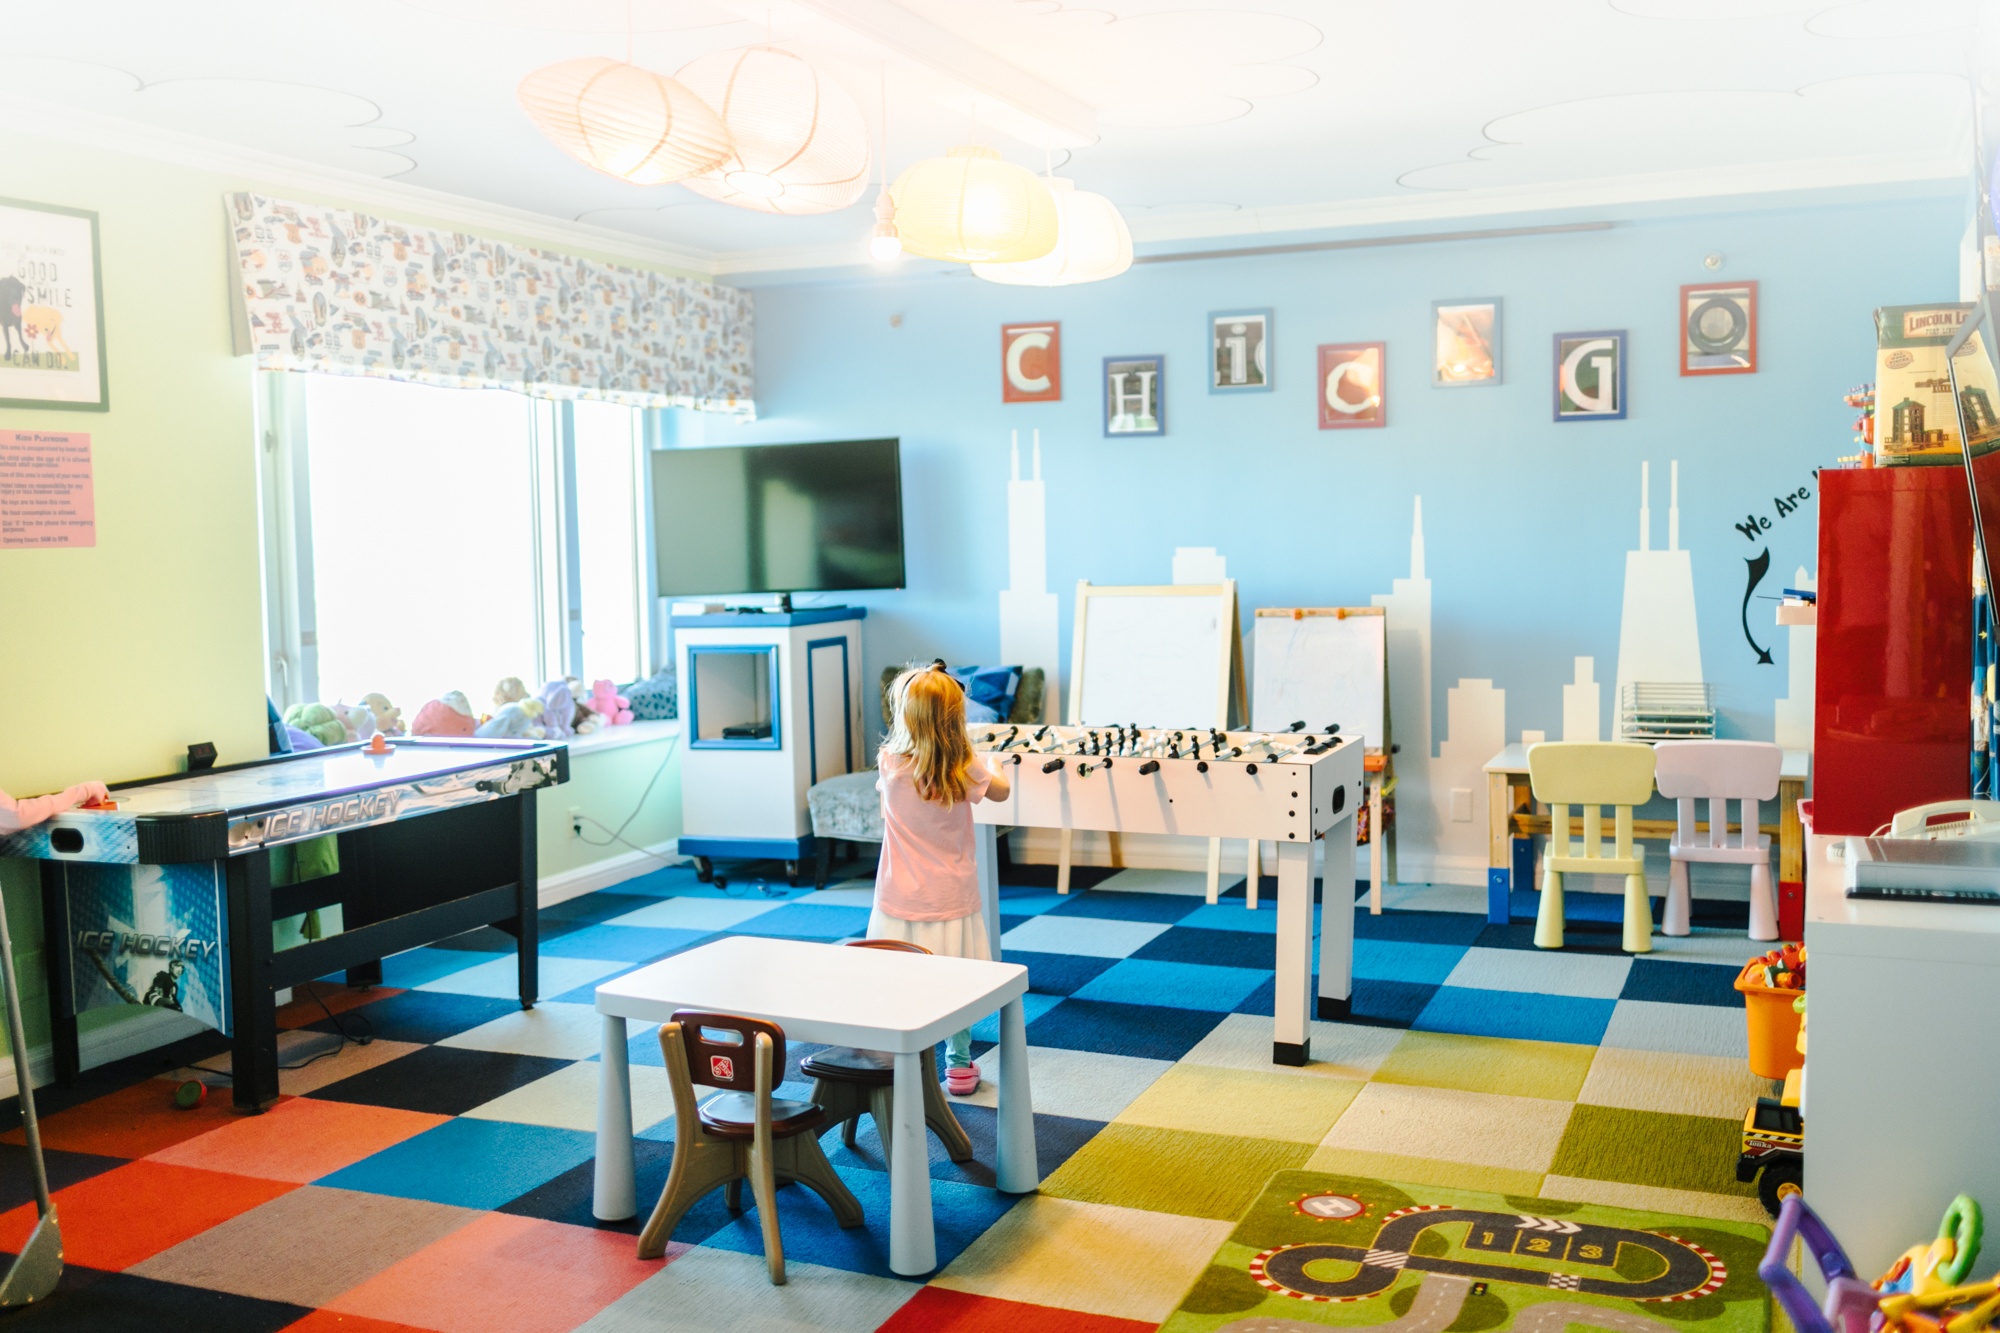 Chicago Hotels with the Best Kid-Friendly Amenities - MiniTime